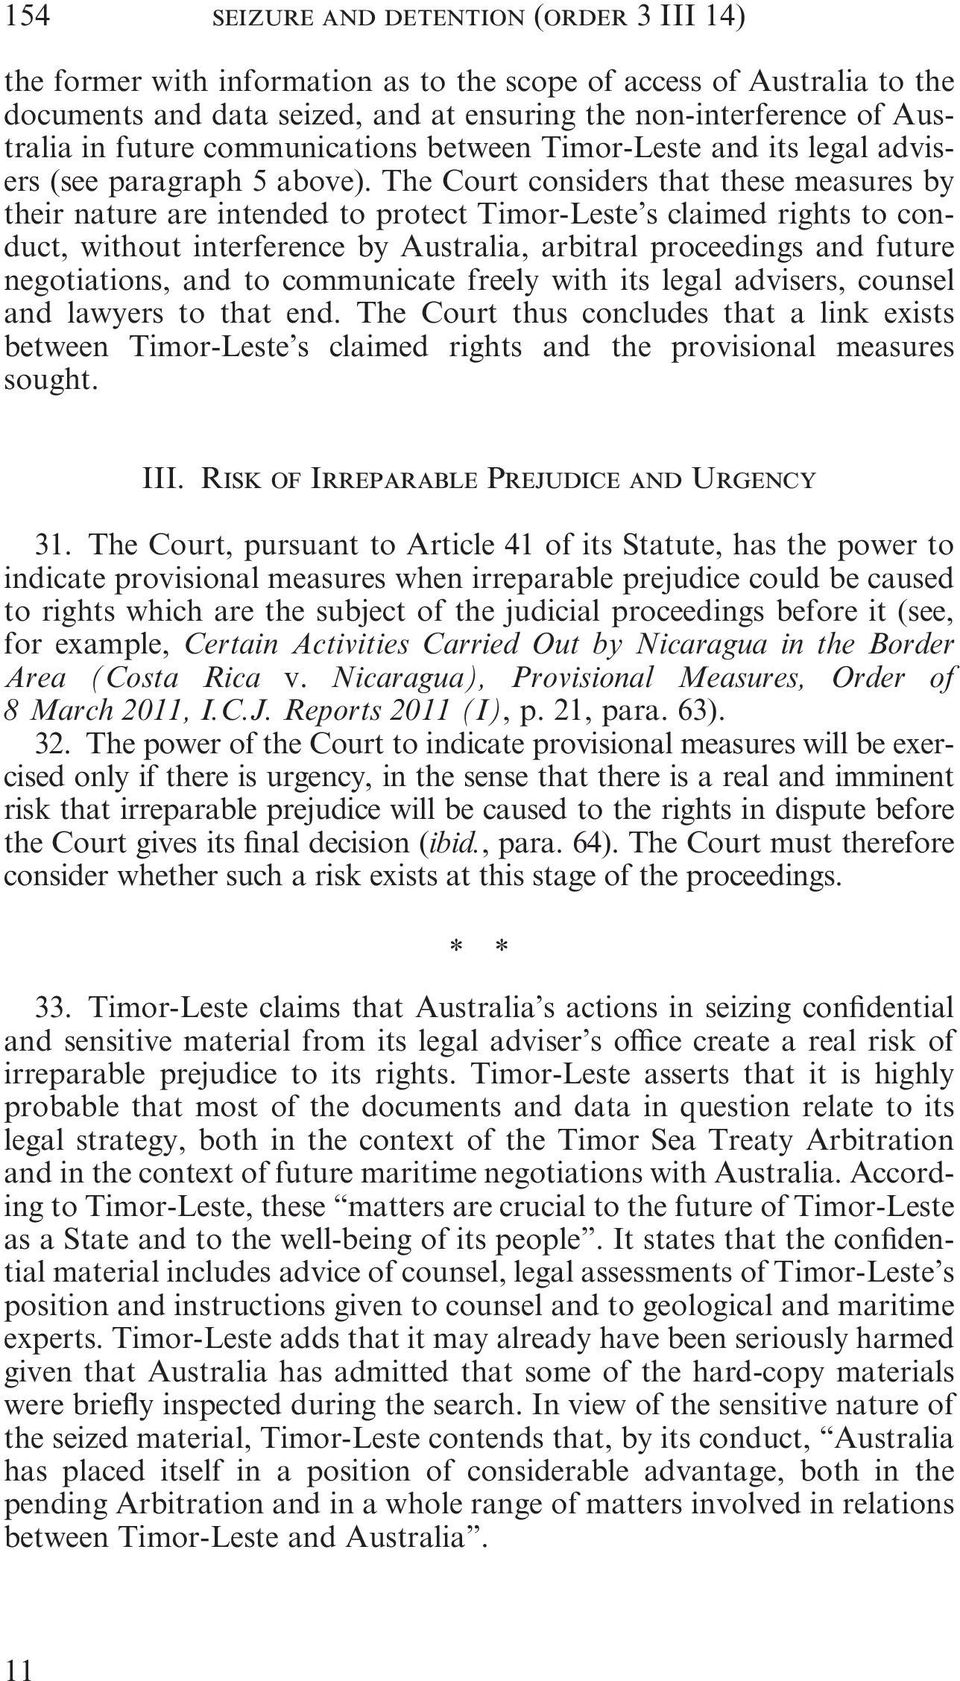 The Court considers that these measures by their nature are intended to protect Timor Leste s claimed rights to conduct, without interference by Australia, arbitral proceedings and future